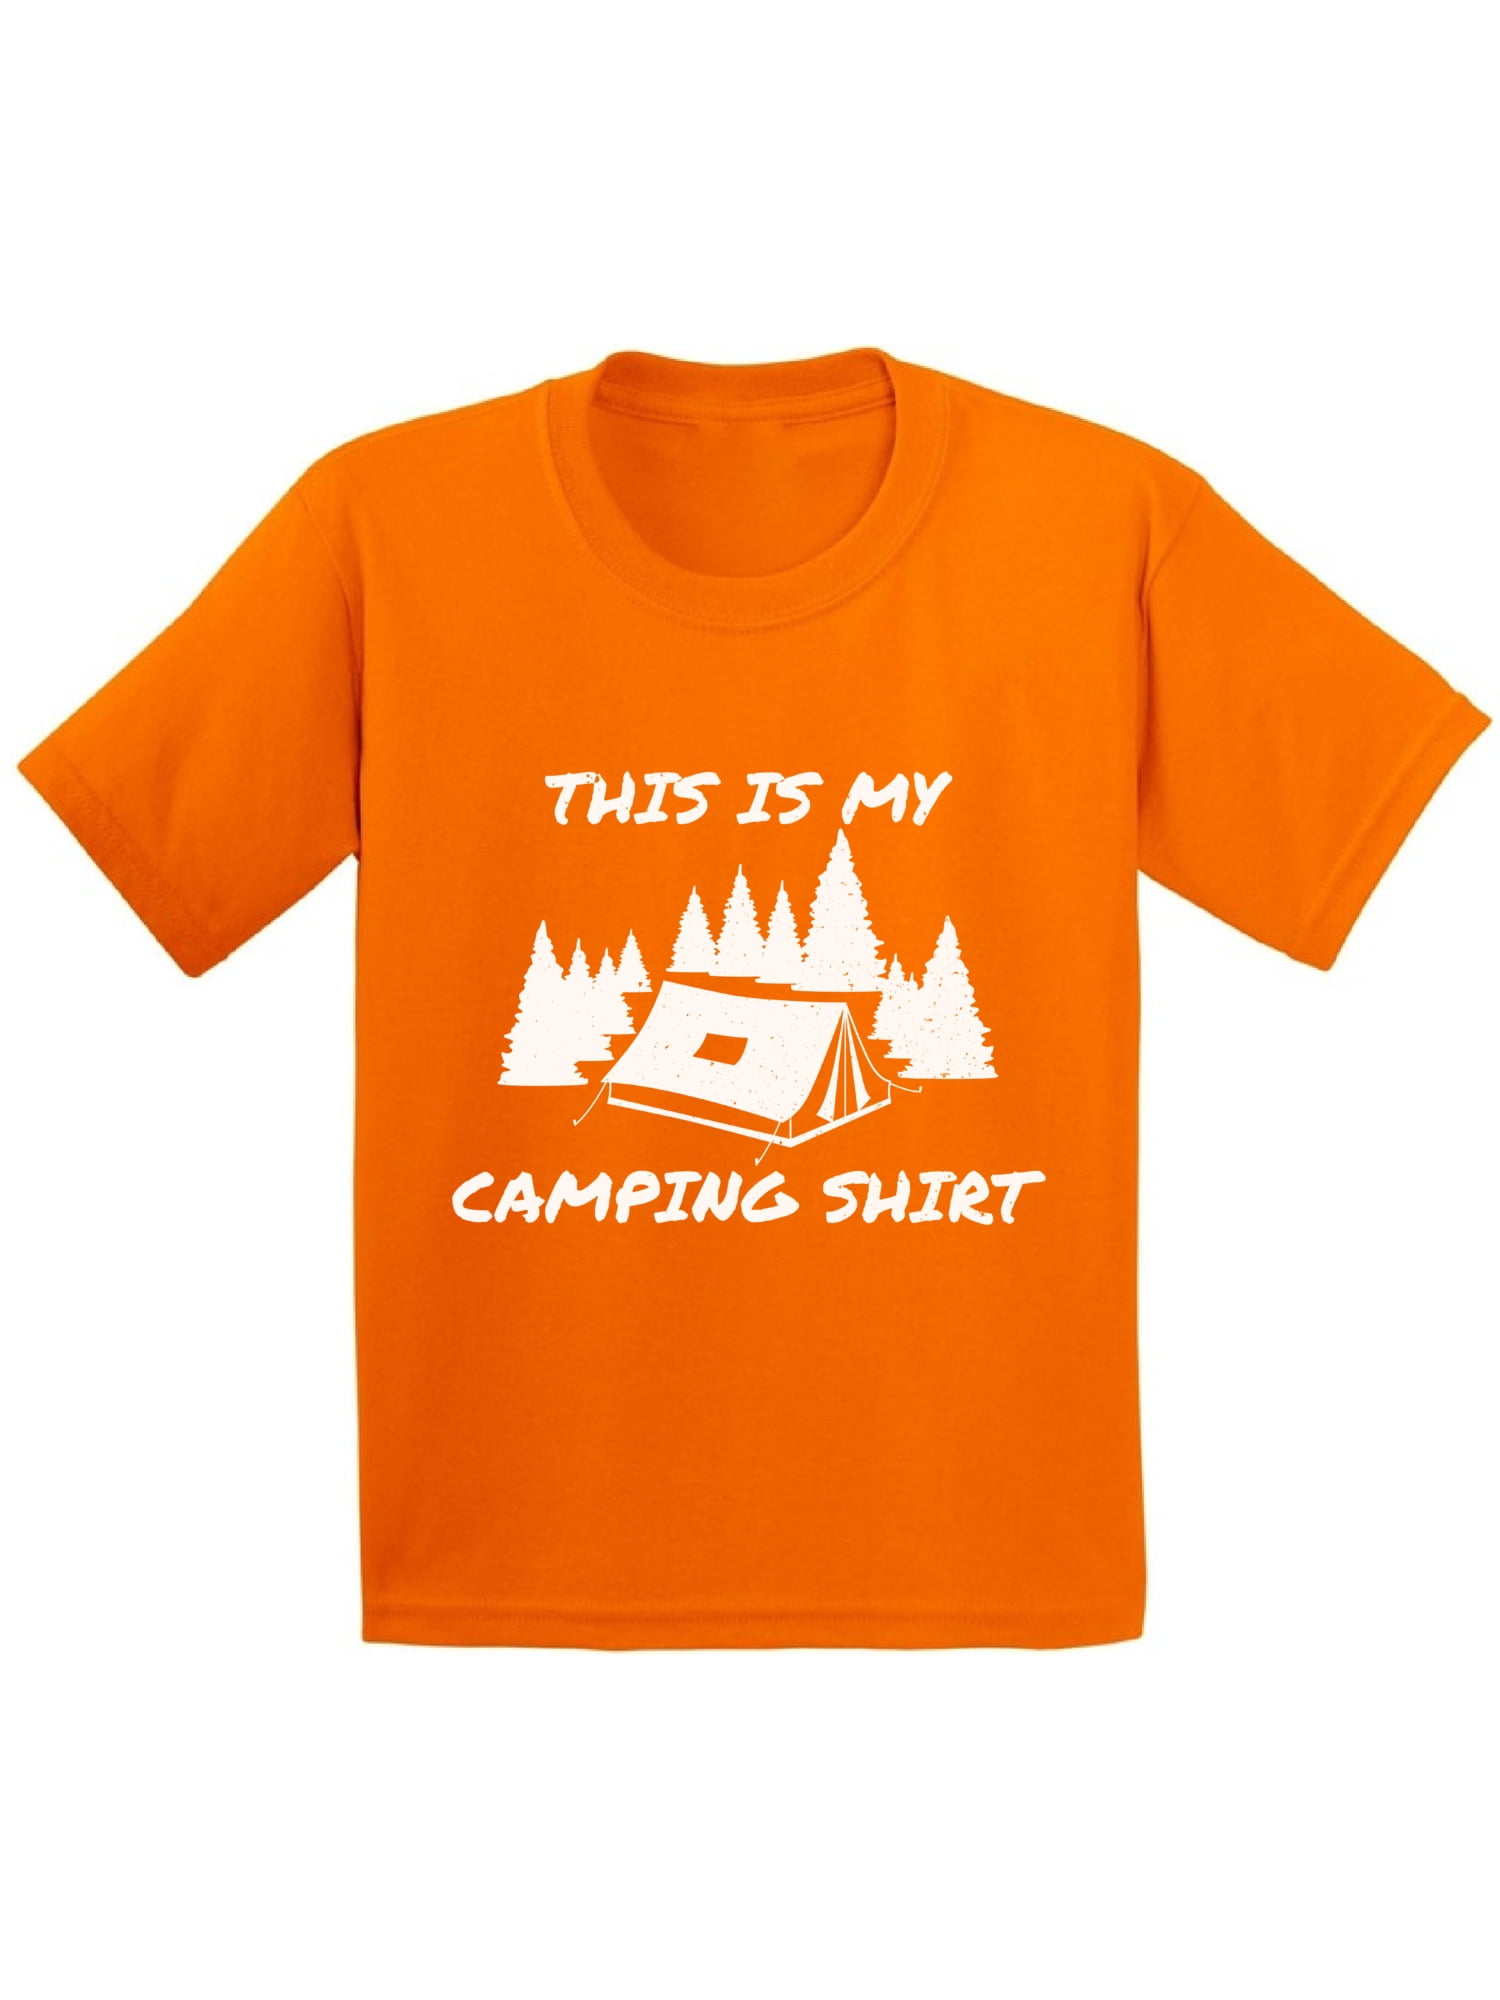 I Heart Love Camping Kids Tee Shirt Pick Size & Color 2T XL 